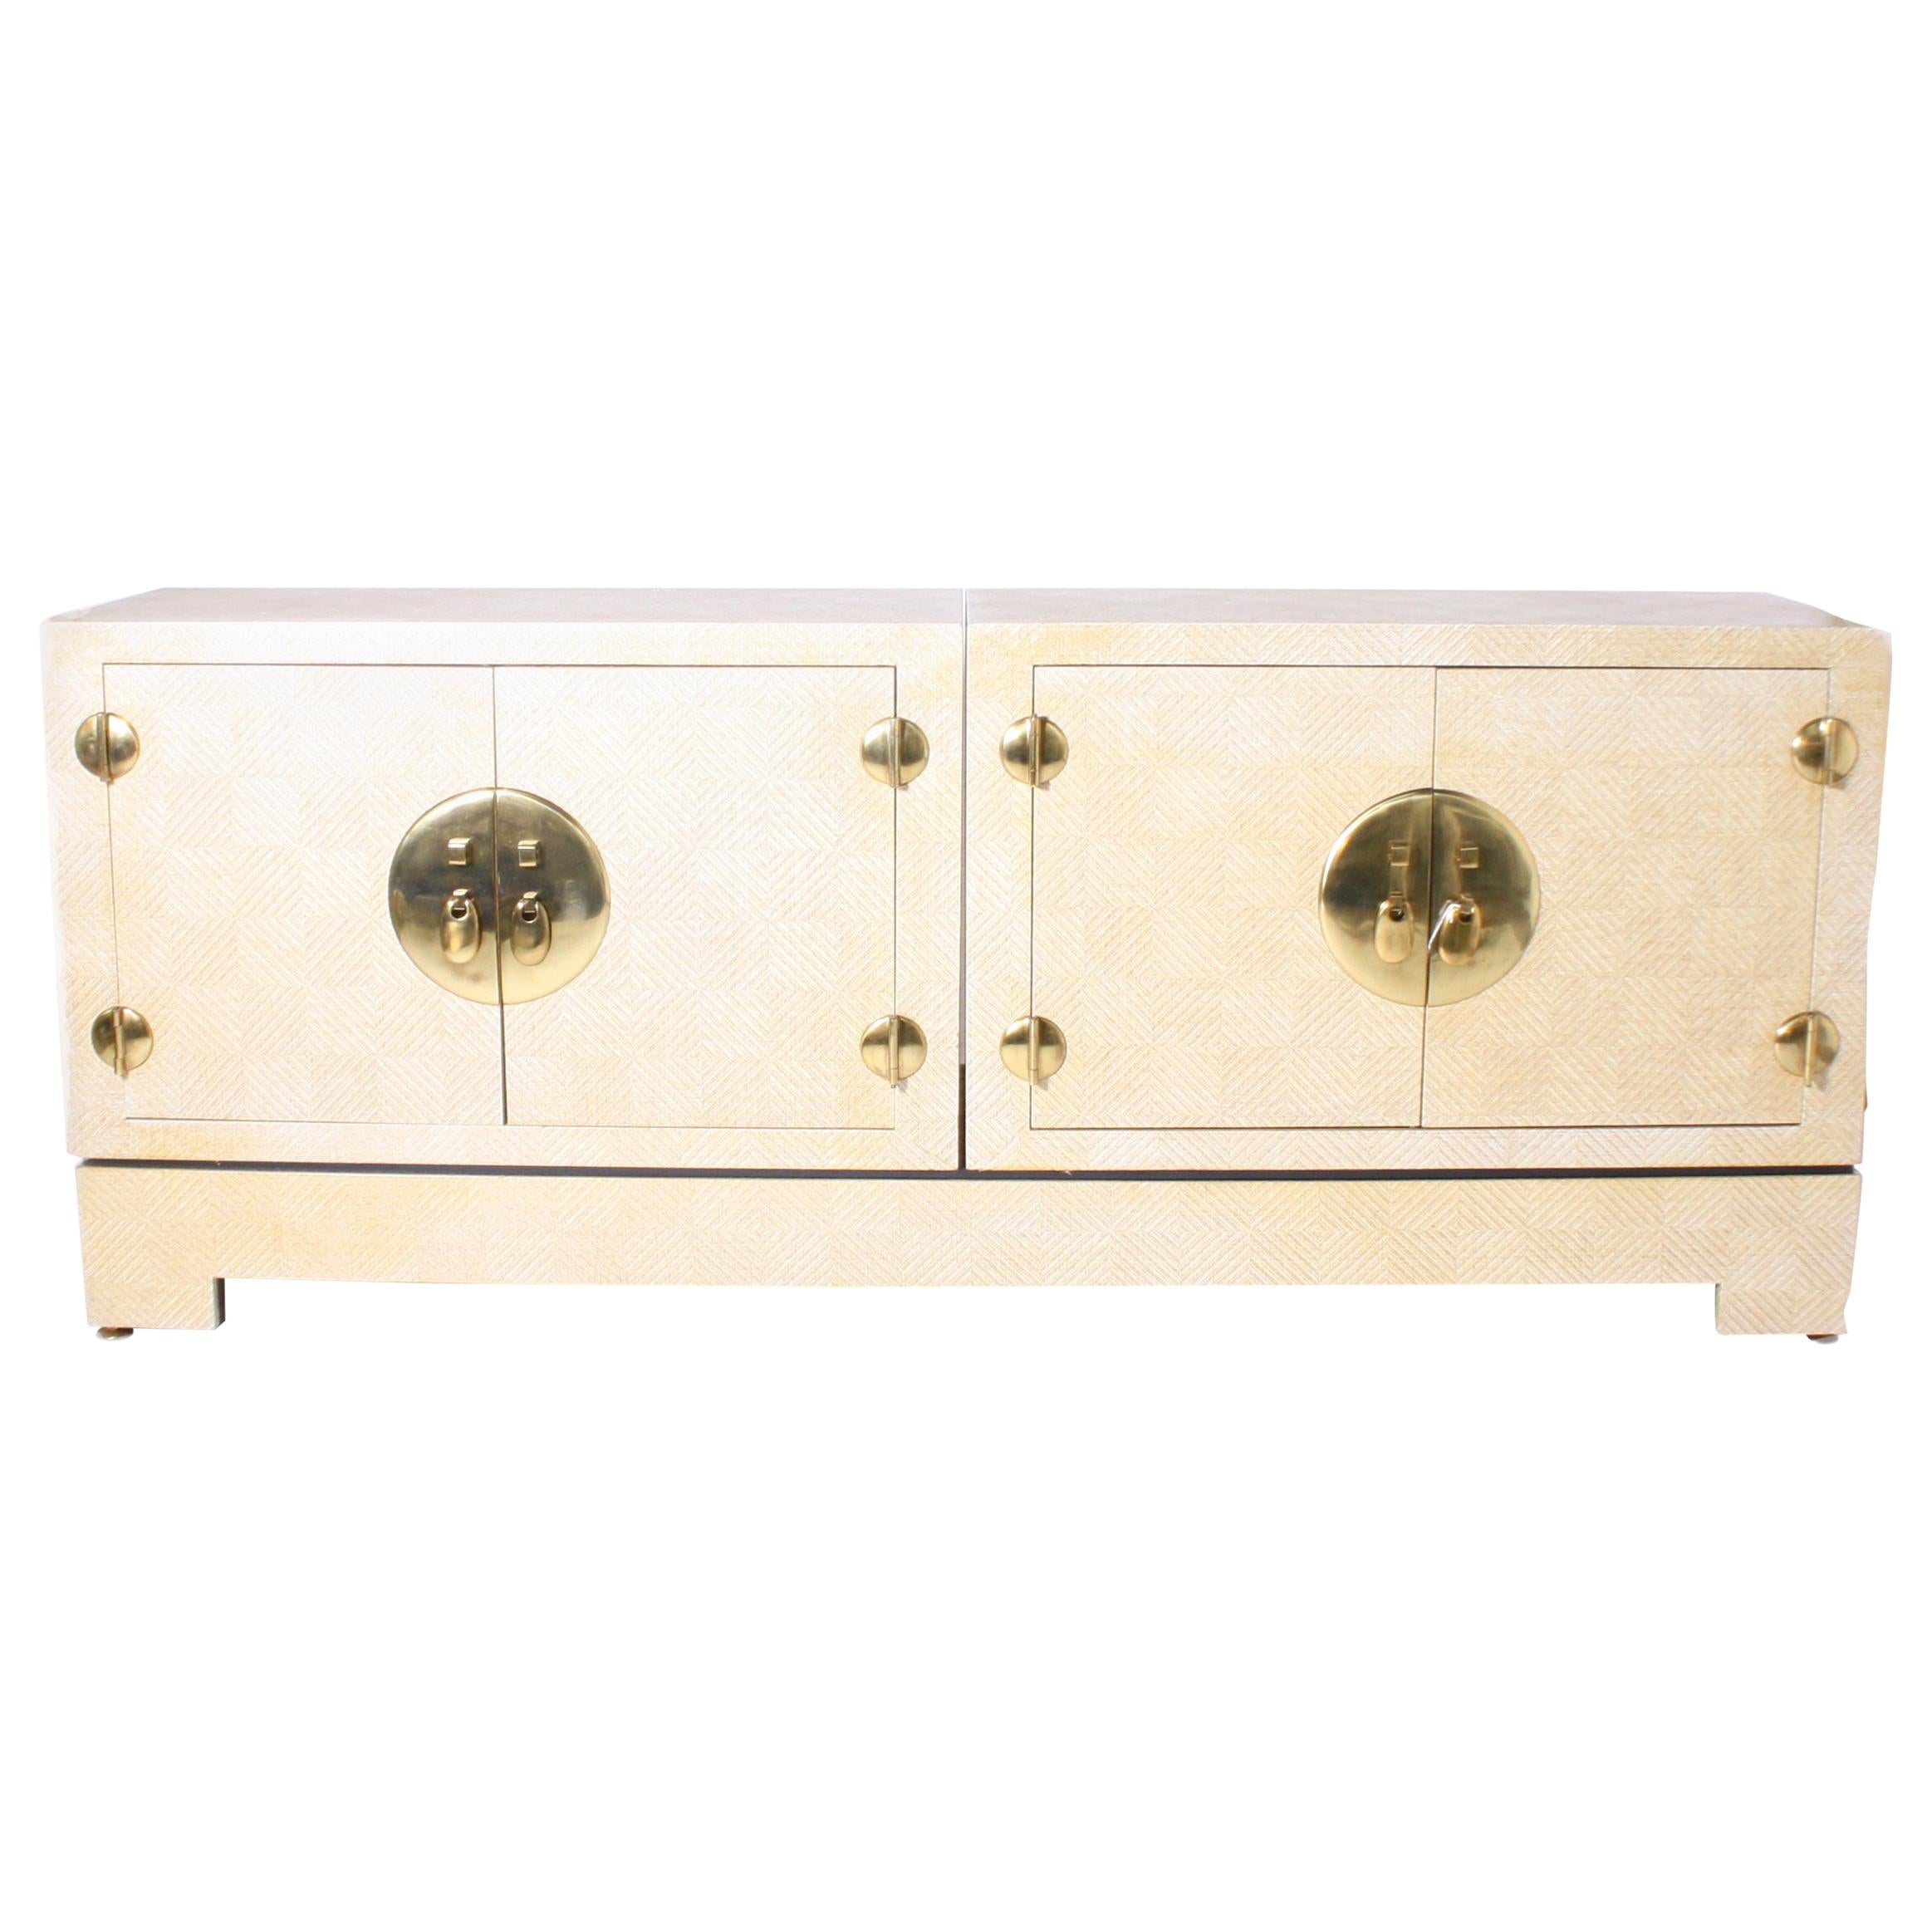 Grasscloth Credenza with Gold Detailing, circa 1960